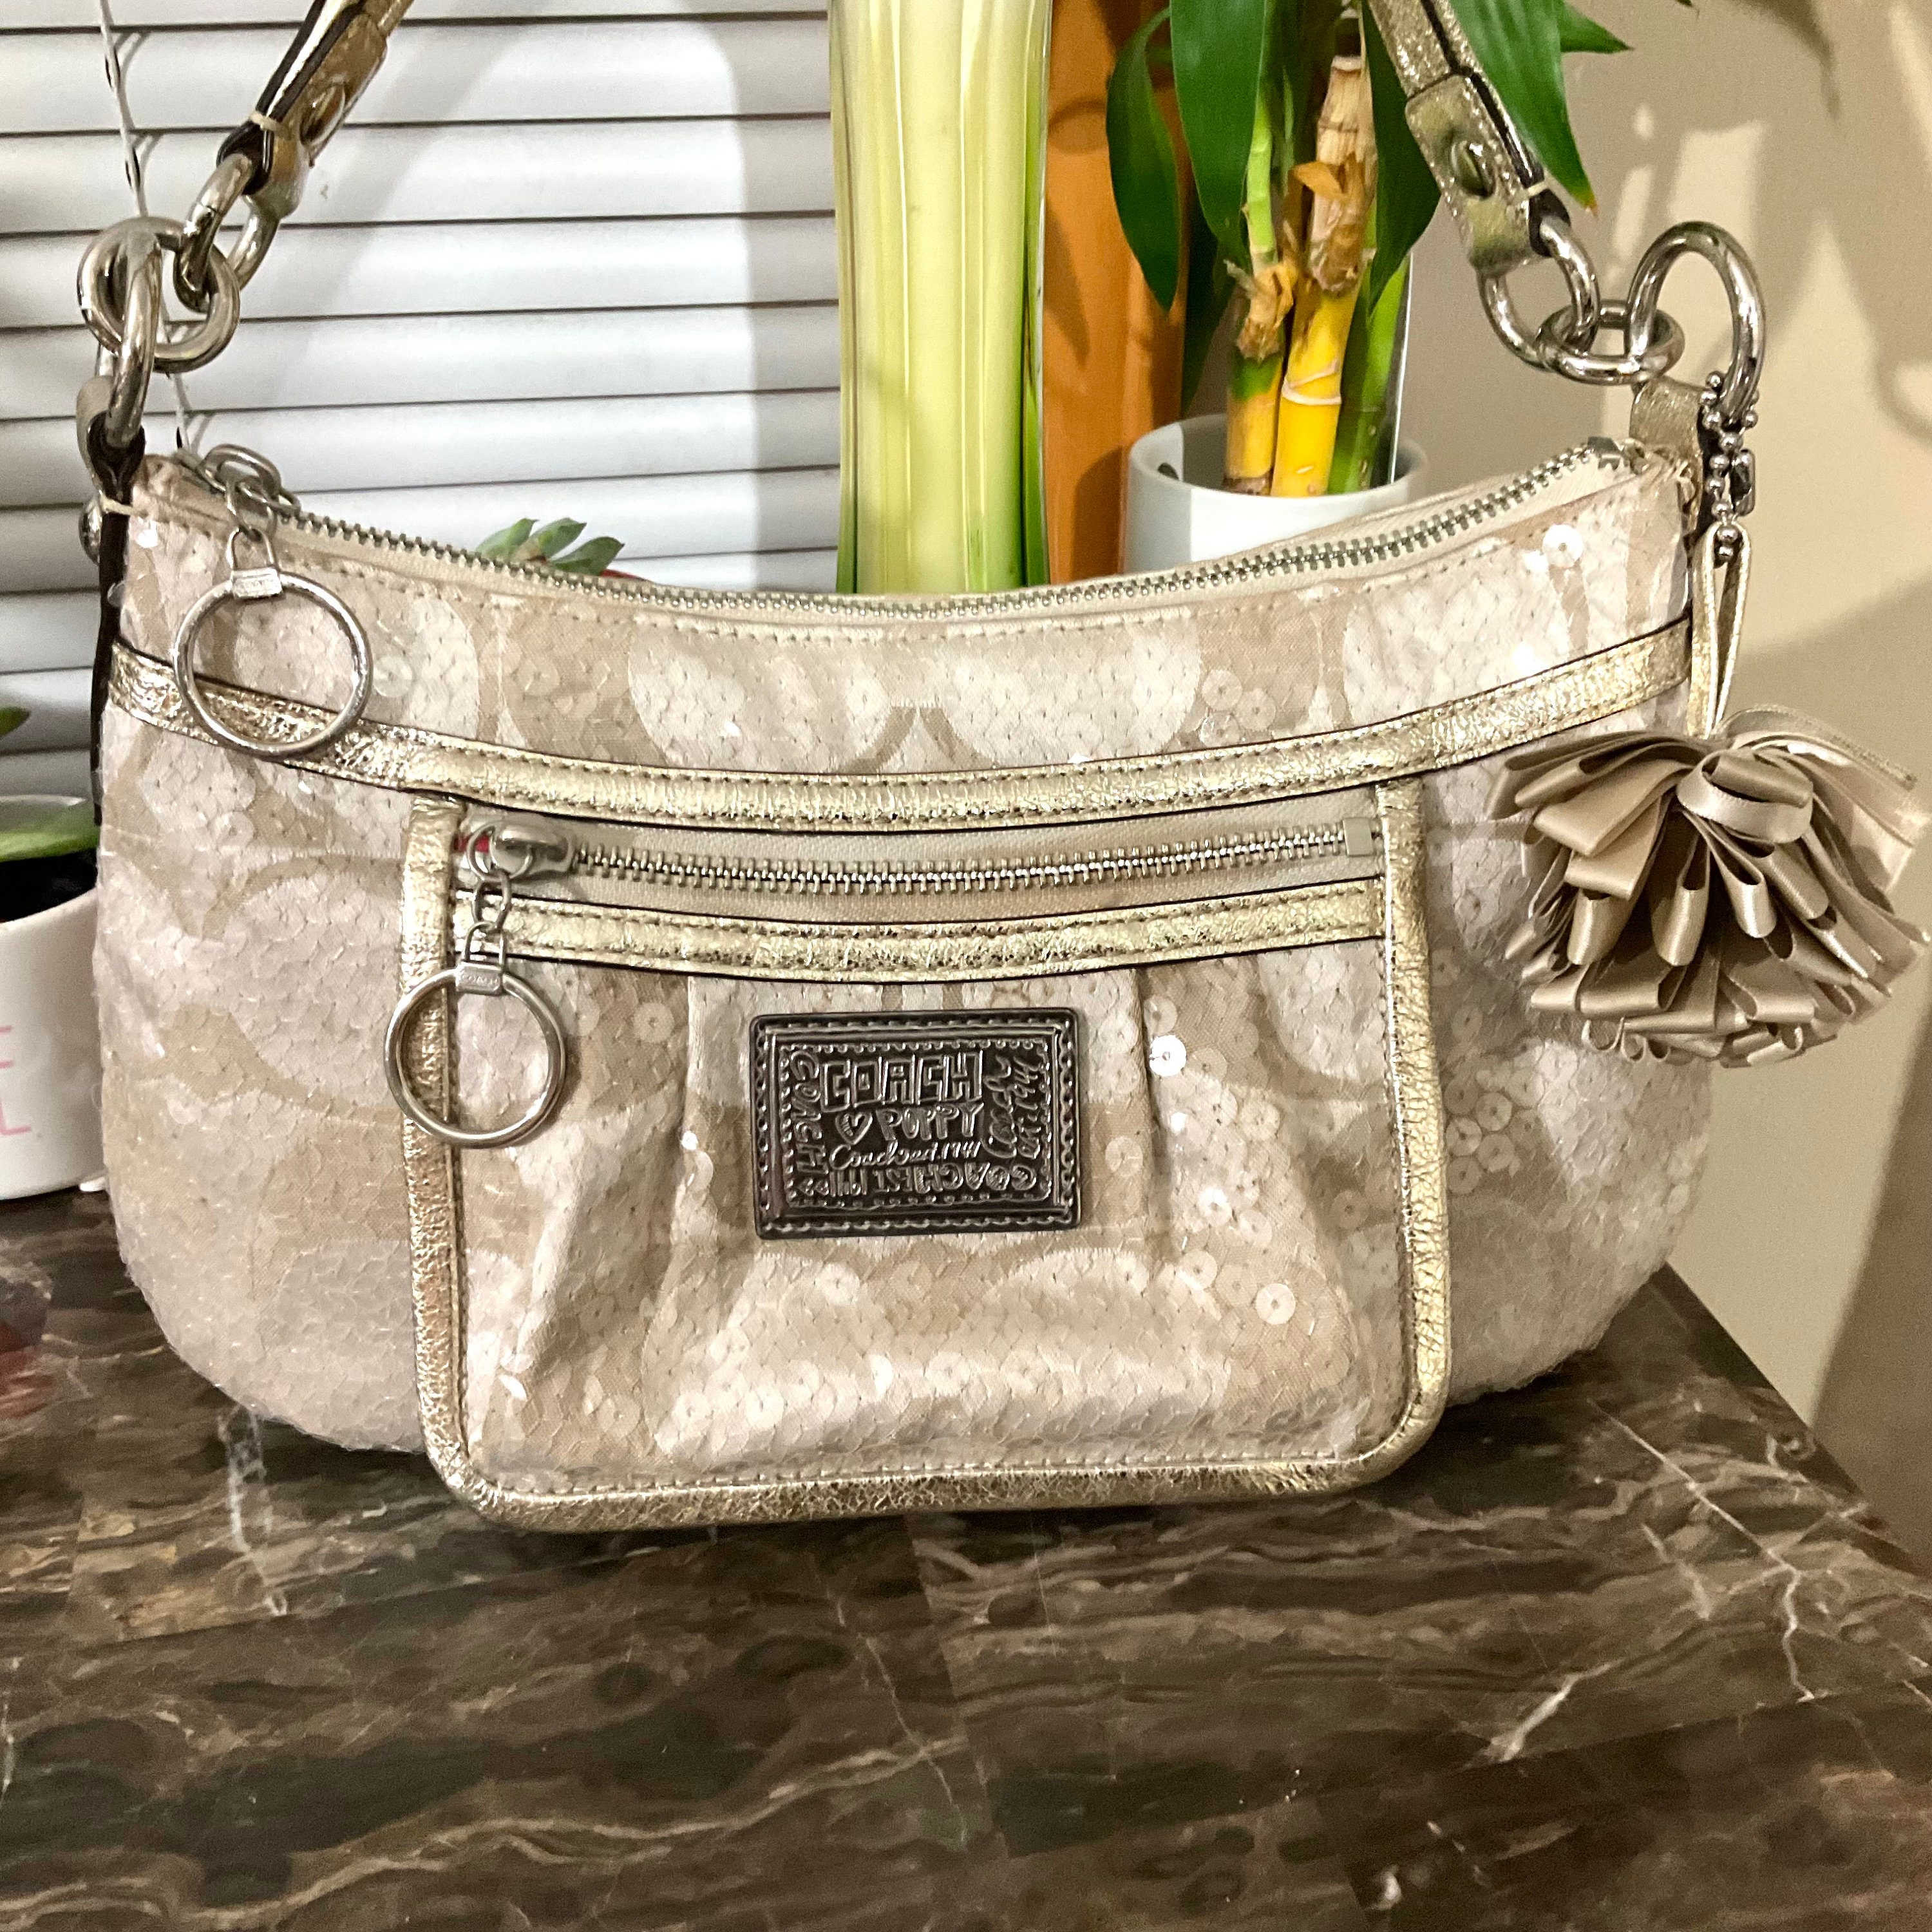 Fashion Sequin Hobo Bag Set With Crossbody Purse, Nylon Round Underarm Bag,  Shimmering Letter Print, Removable Wide Strap From Fashion_shop588, $99.08  | DHgate.Com